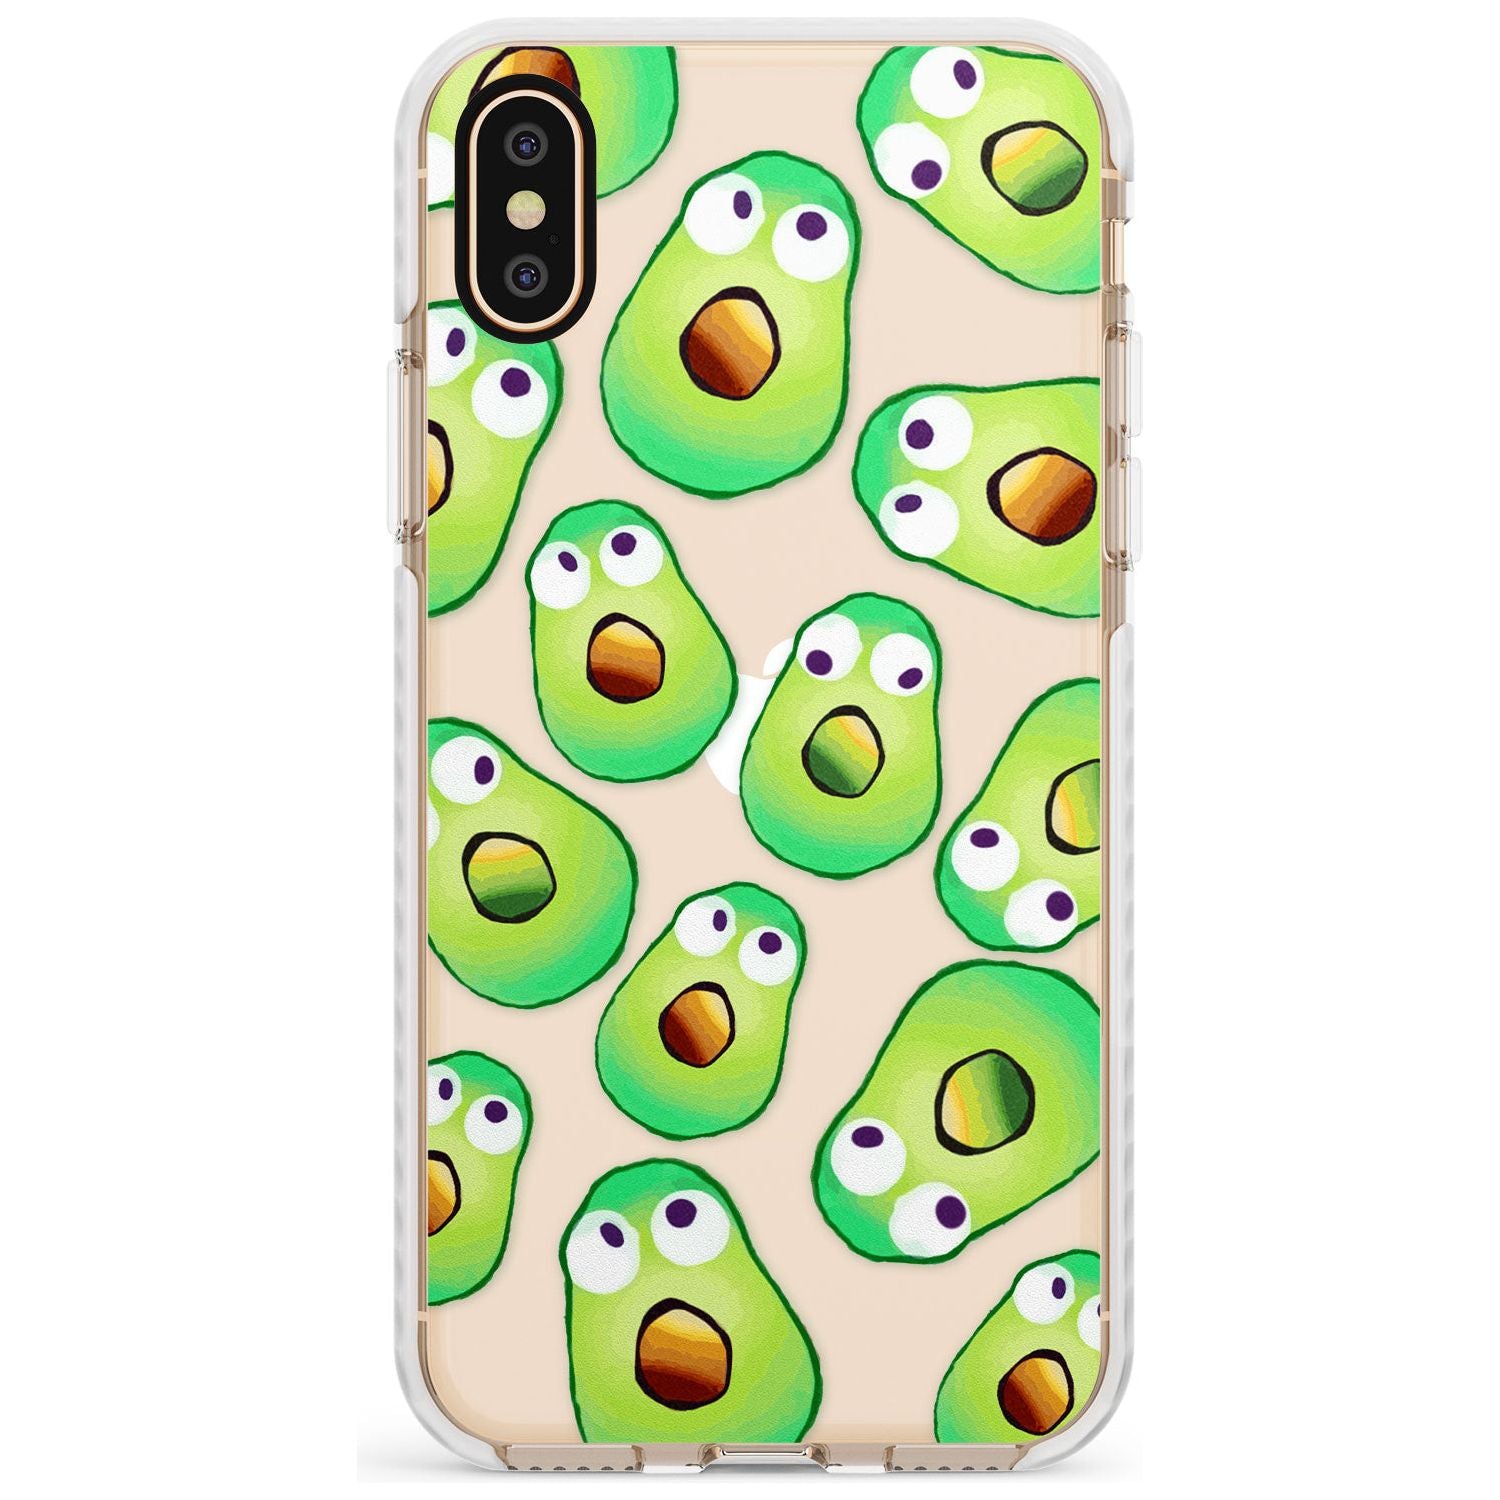 Shocked Avocados Impact Phone Case for iPhone X XS Max XR